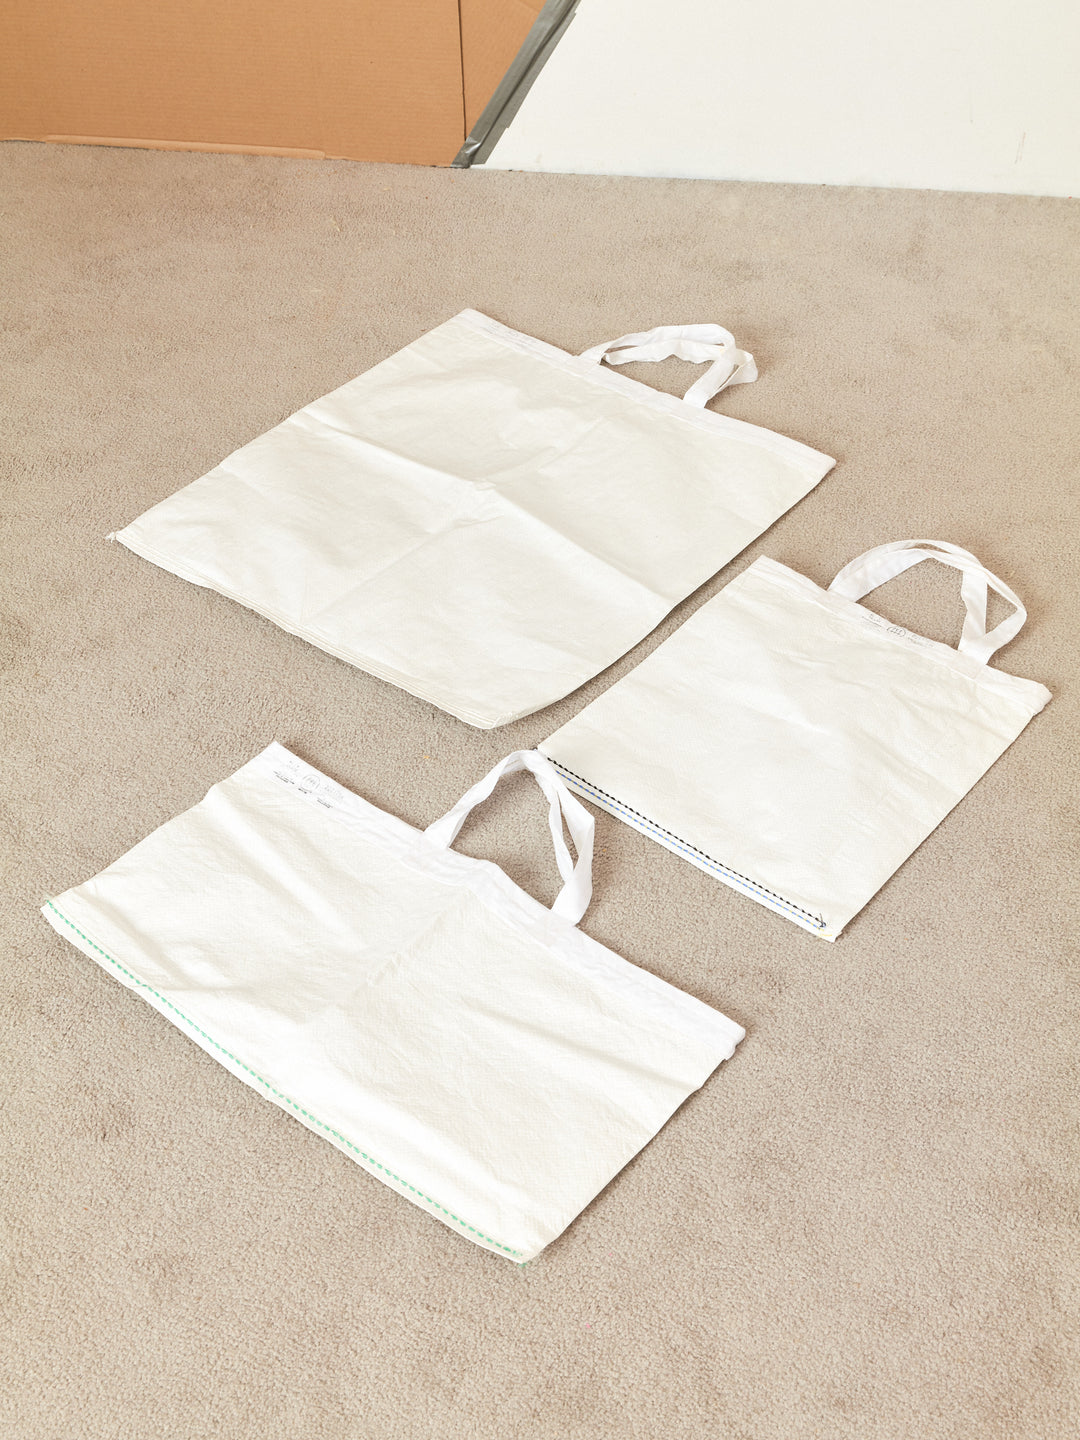 Loop Handle Off White Poly Cotton Carry Bag, Capacity: 1kg, Size/Dimension:  13x15 Inch (wxl) at Rs 8.75/piece in Mysore